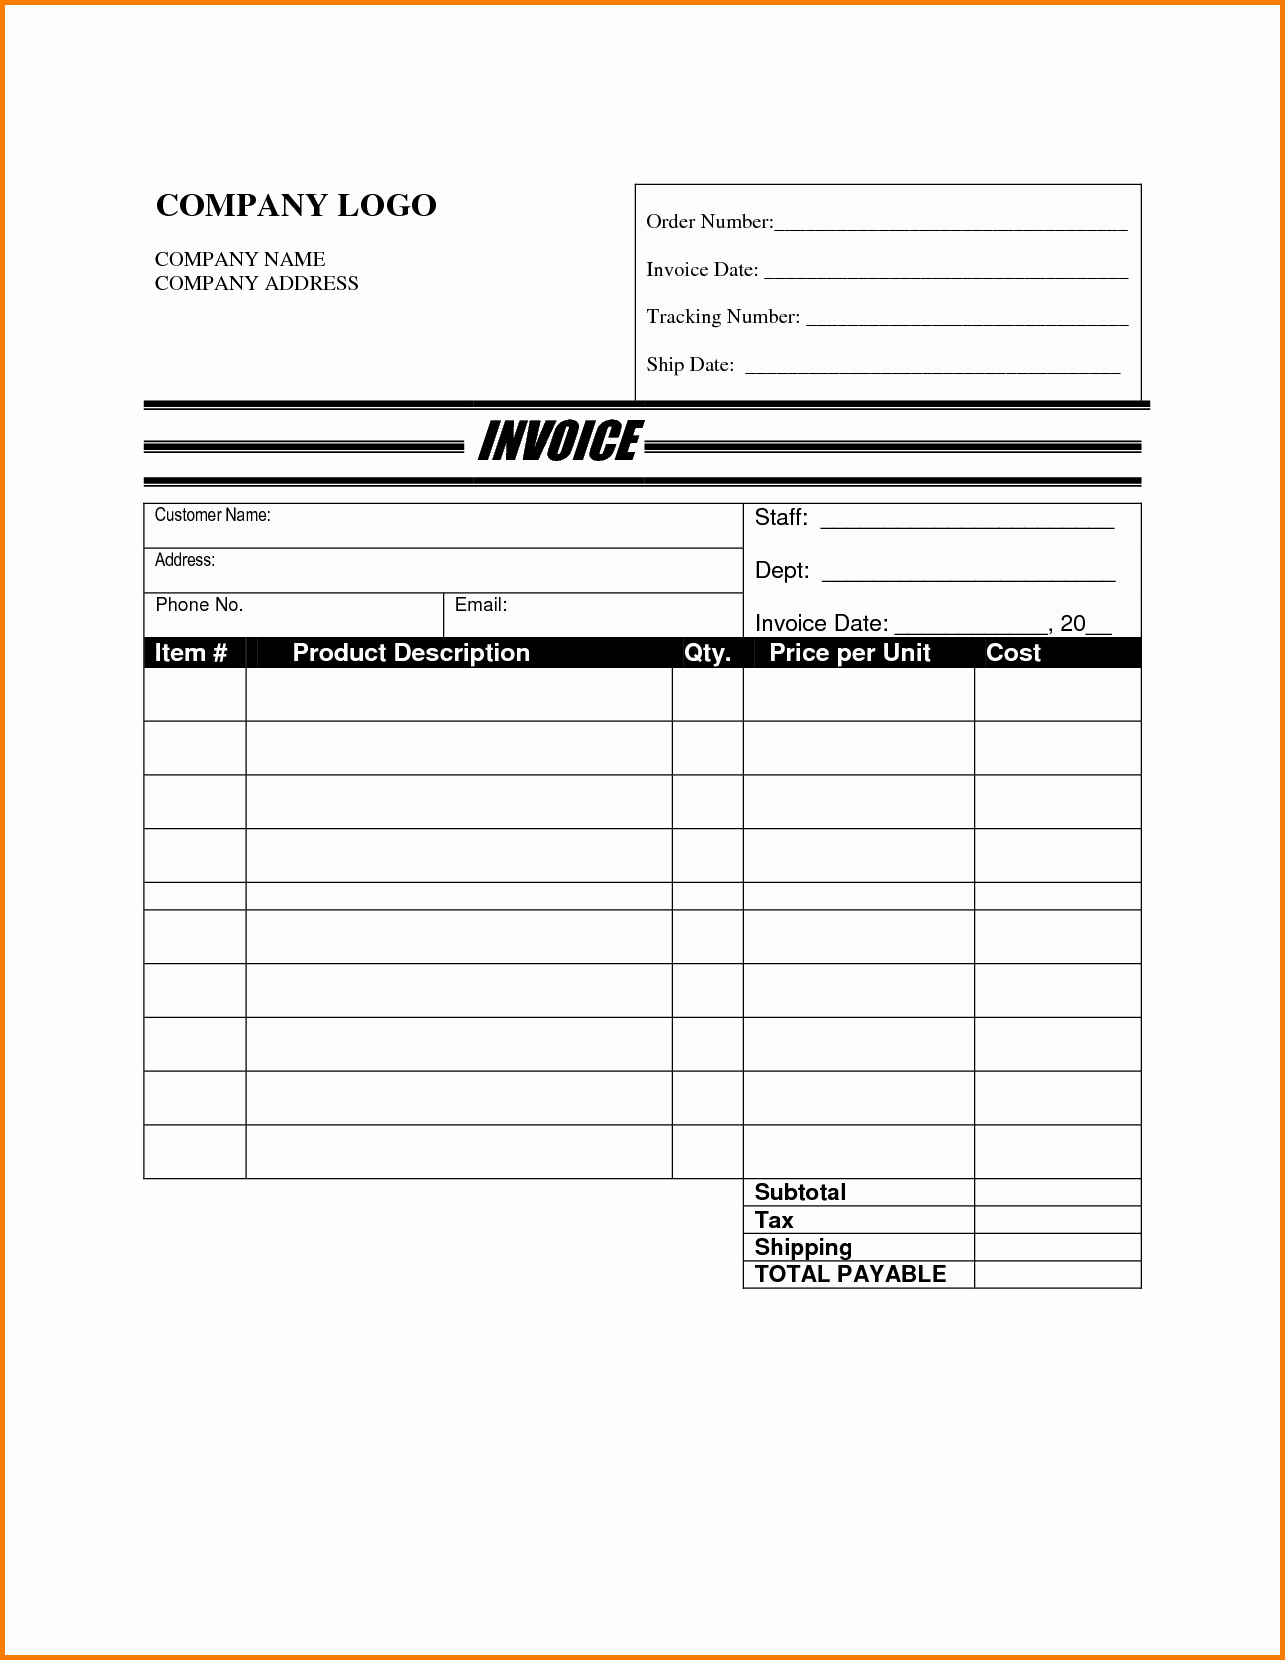 Moving Company Invoice Template Free – Wfacca with Moving Company Invoice Template Free